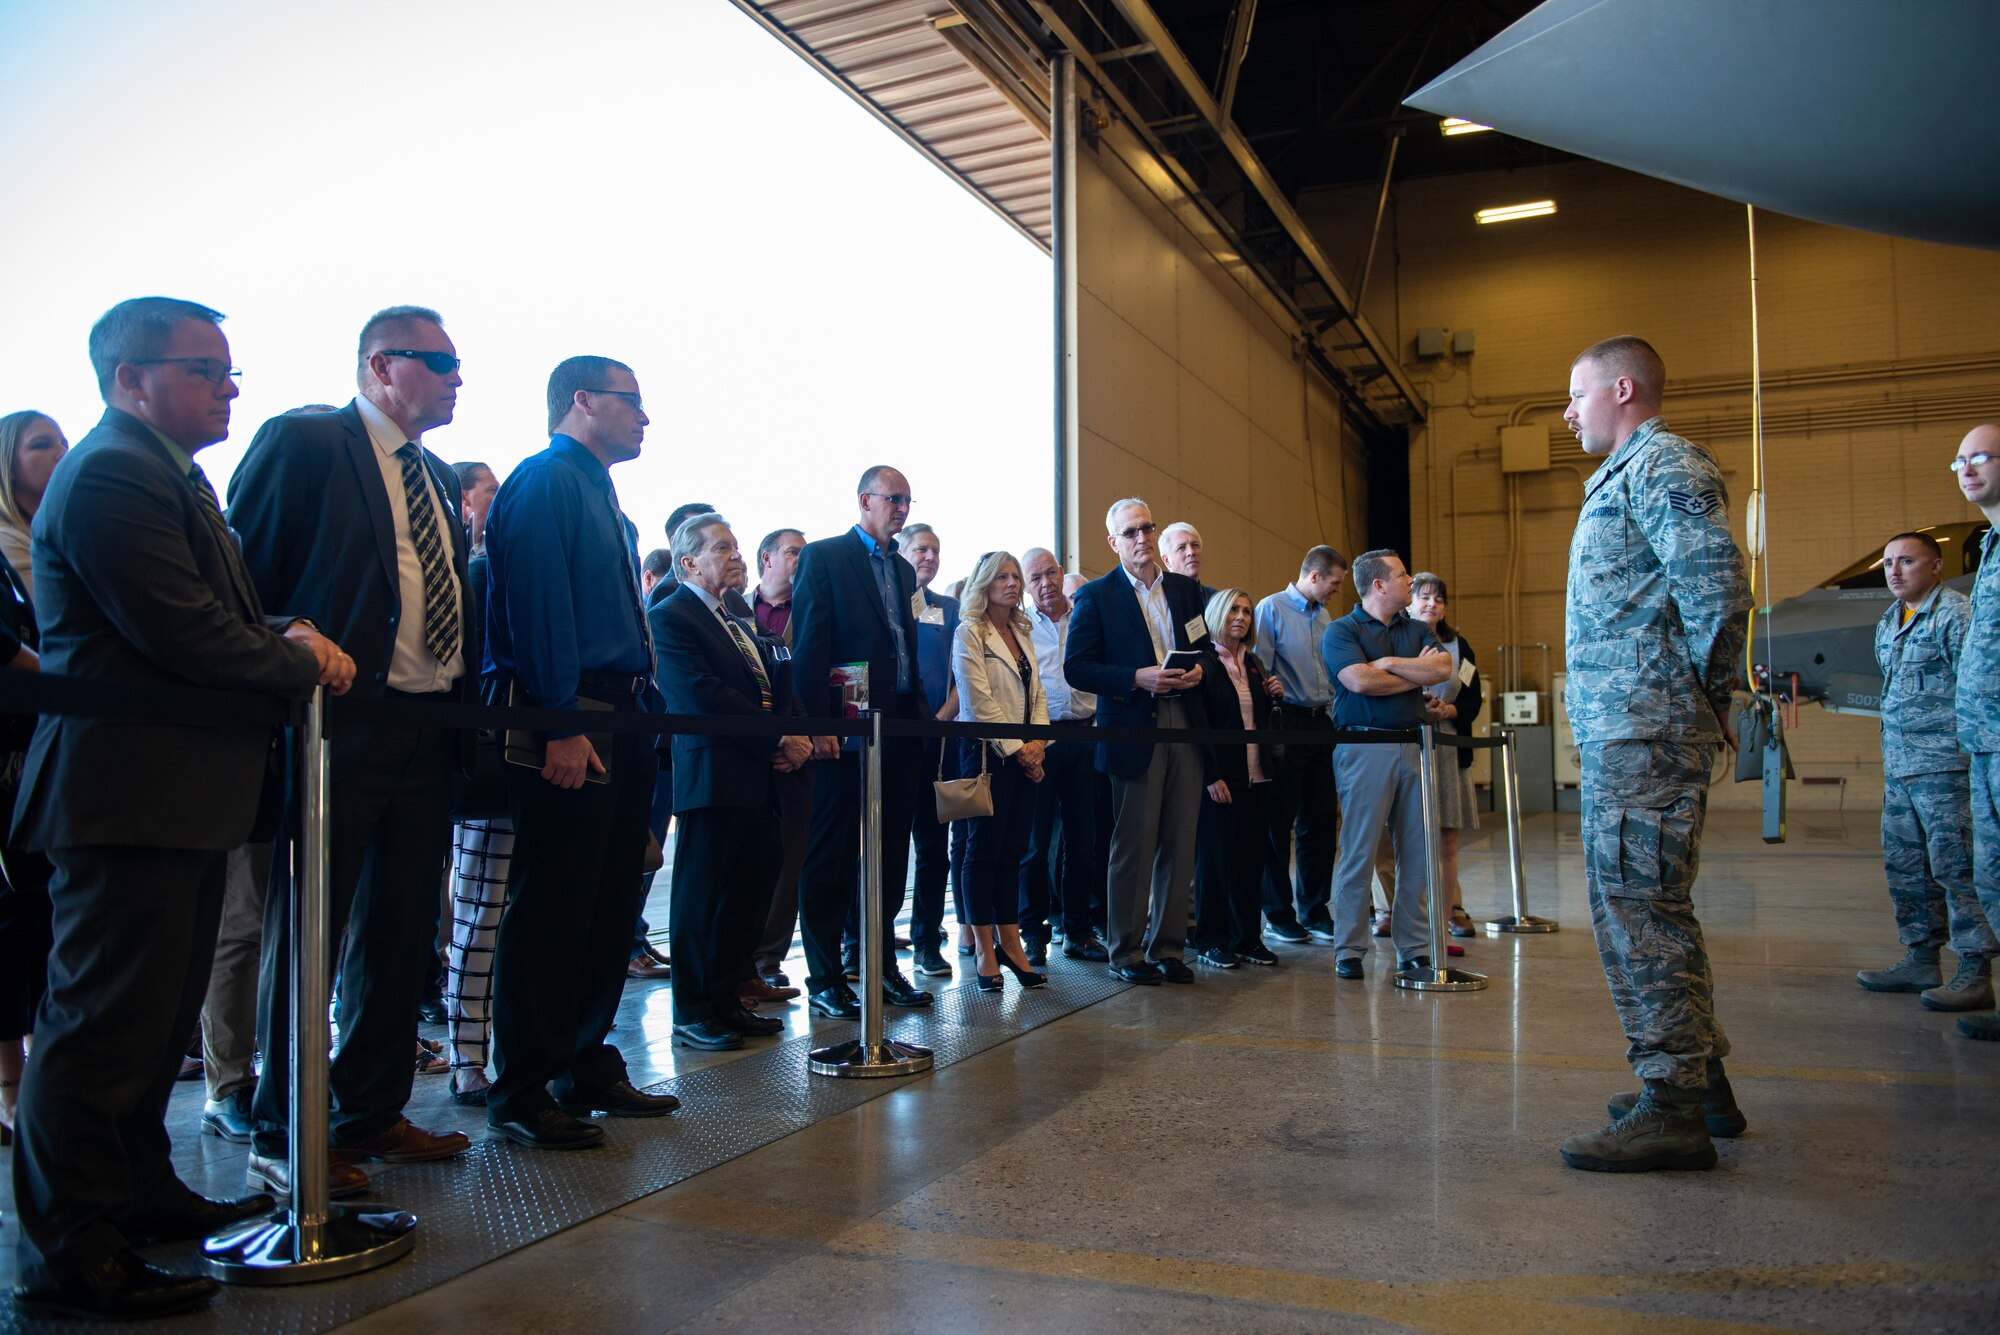 An Airman assigned to the 61st Aircraft Maintenance Unit speaks to members of the Personalized Learning Cohort during a tour at Luke Air Force Base, Ariz., Nov. 2, 2018. Cohort members toured the base to gain insight on the 56th Fighter Wing’s pilot training mission. (U.S. Air Force photo by Senior Airman Alexander Cook)